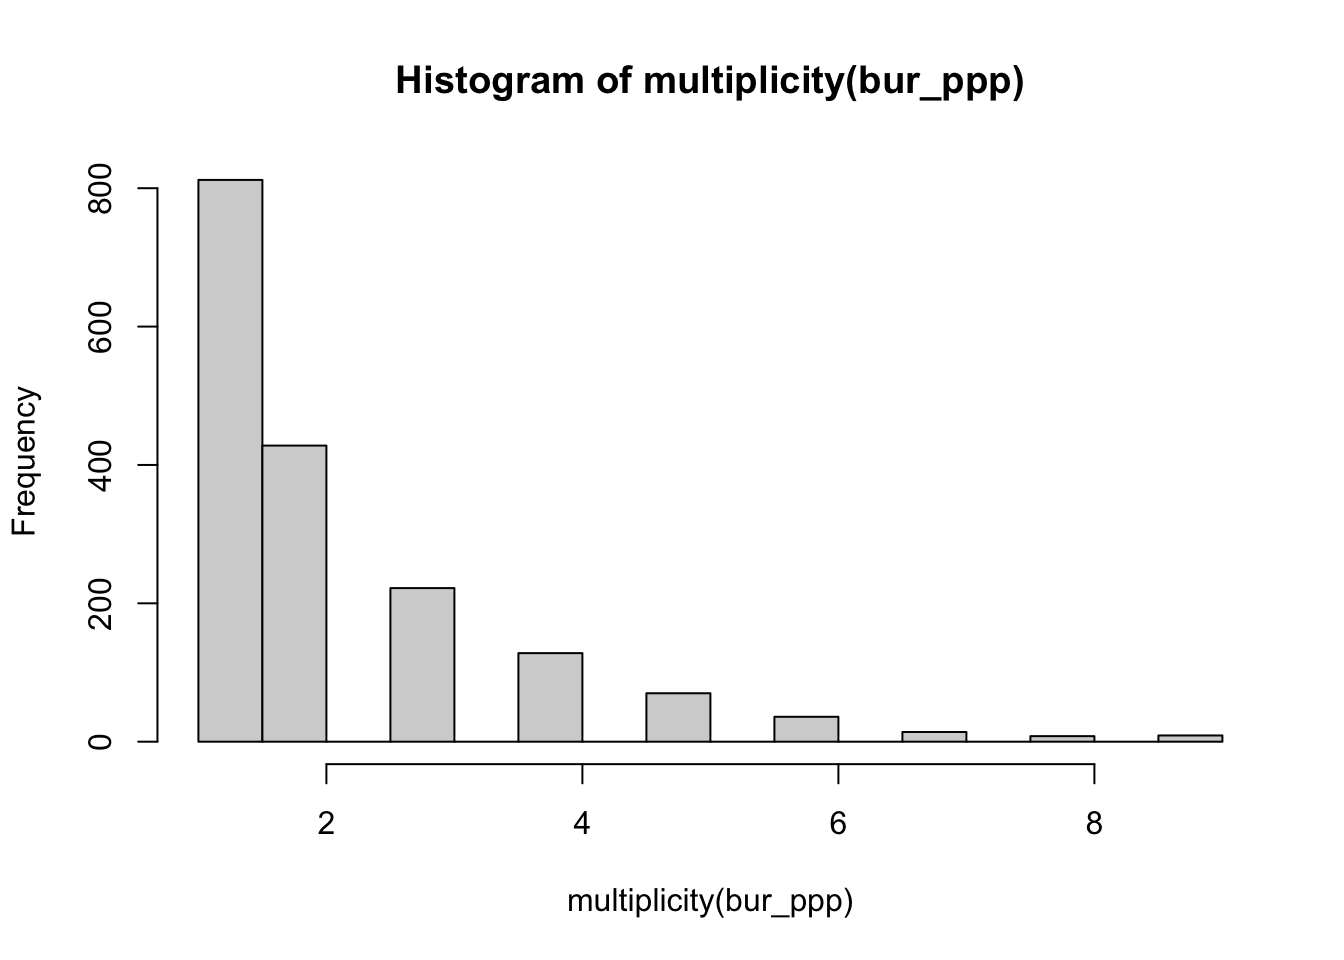 A bar chart titled 'Histogram of multiplicity, bur_ppp', with bars shaded grey. The vertical axis is labeled 'Frequency', and ranges from zero to eight hundred, with notches every two hundred values. The horizontal axis is labeled 'multiplicity, bur_ppp', ranging from zero to ten, with markings at two, four, six, and eight. The first bar is a little over eight hundred tall, with each subsequent bar being close to half of the previous one.